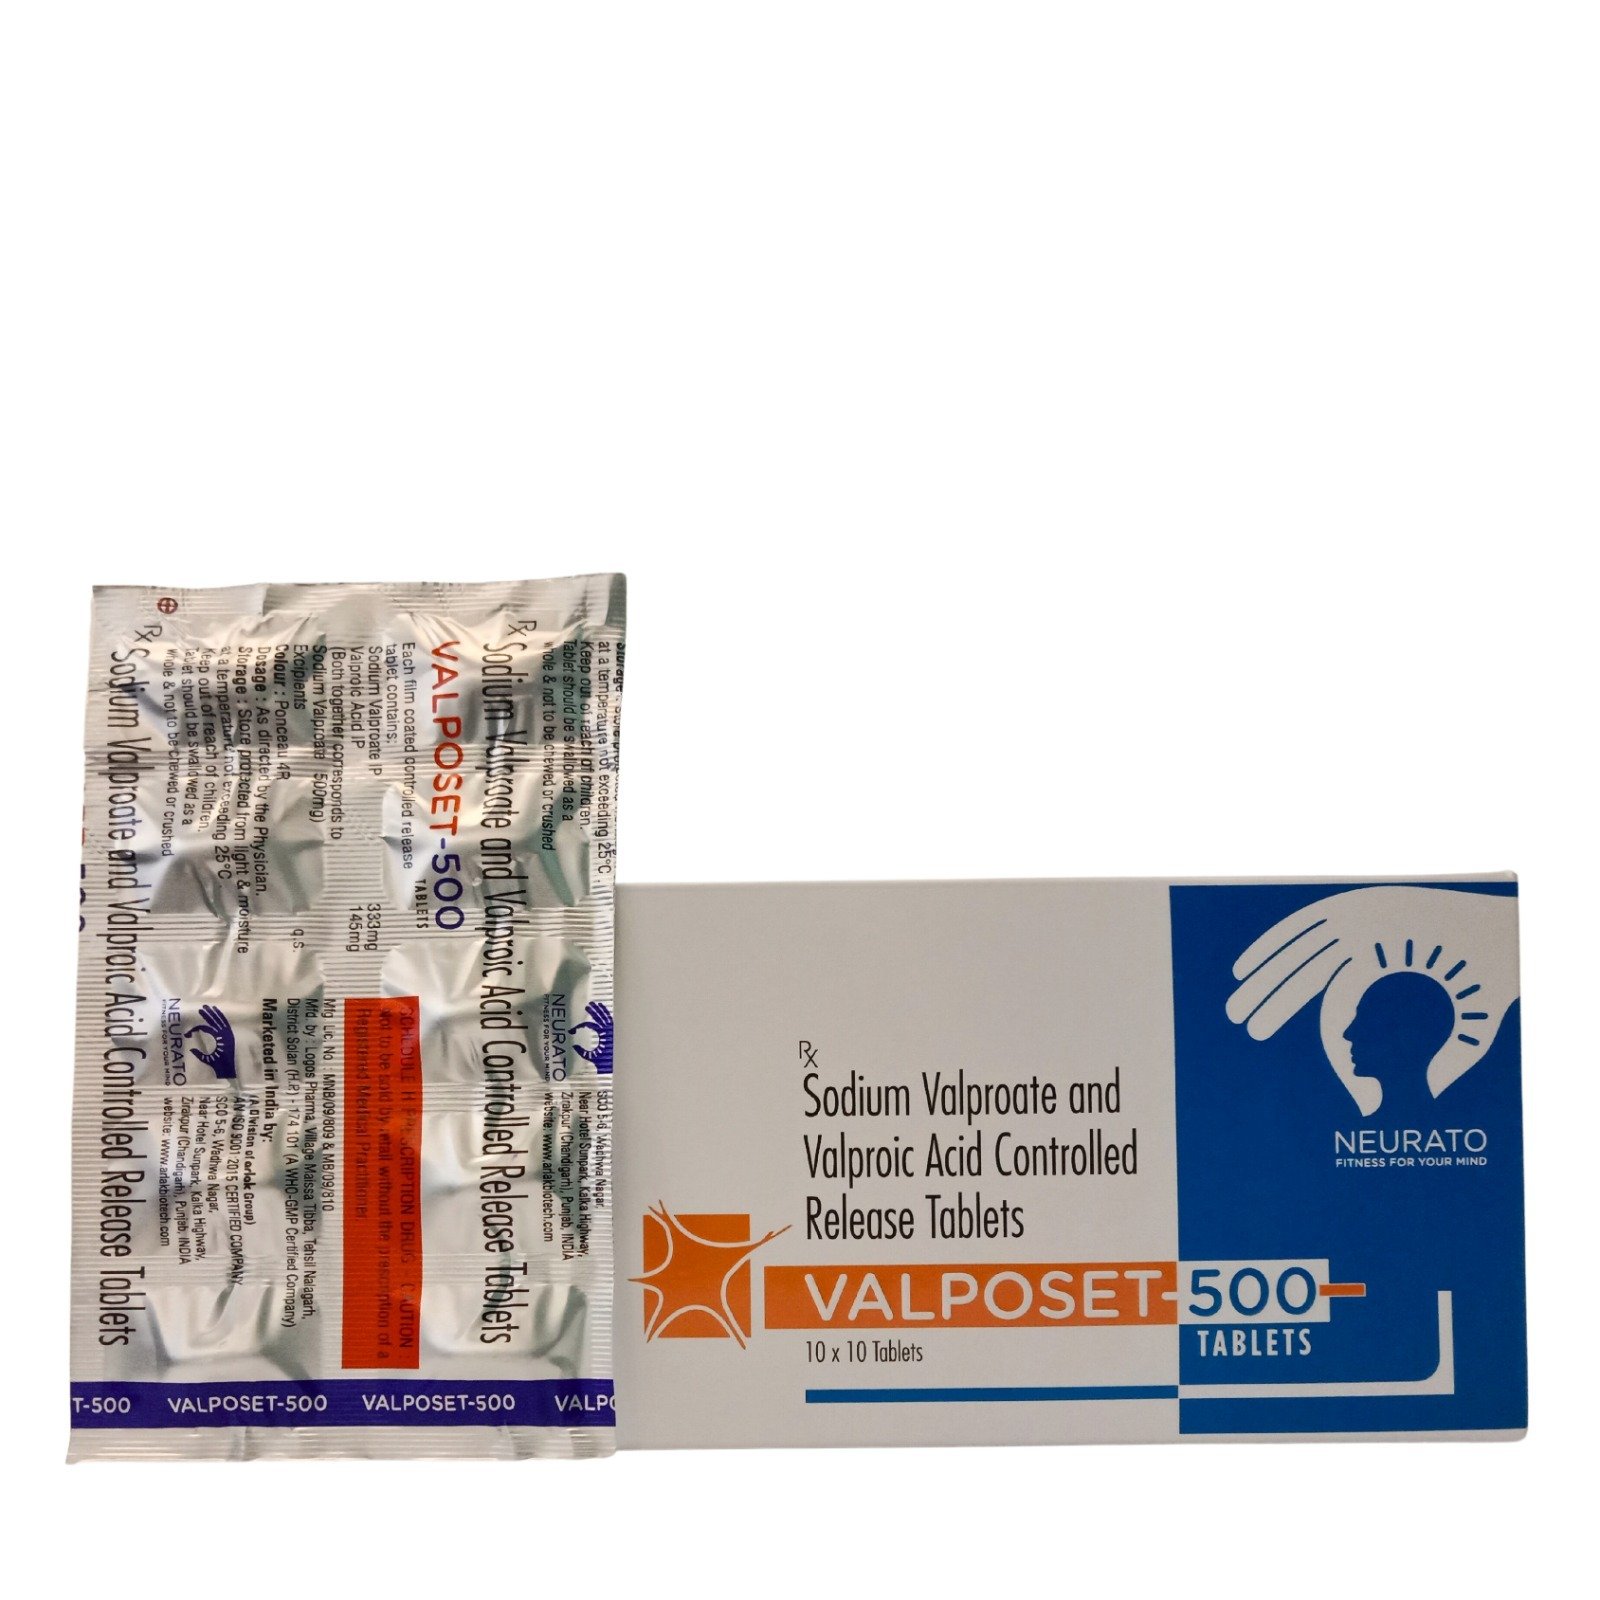 Sodium Valproate and Valproic Acid Controlled Release Tablets